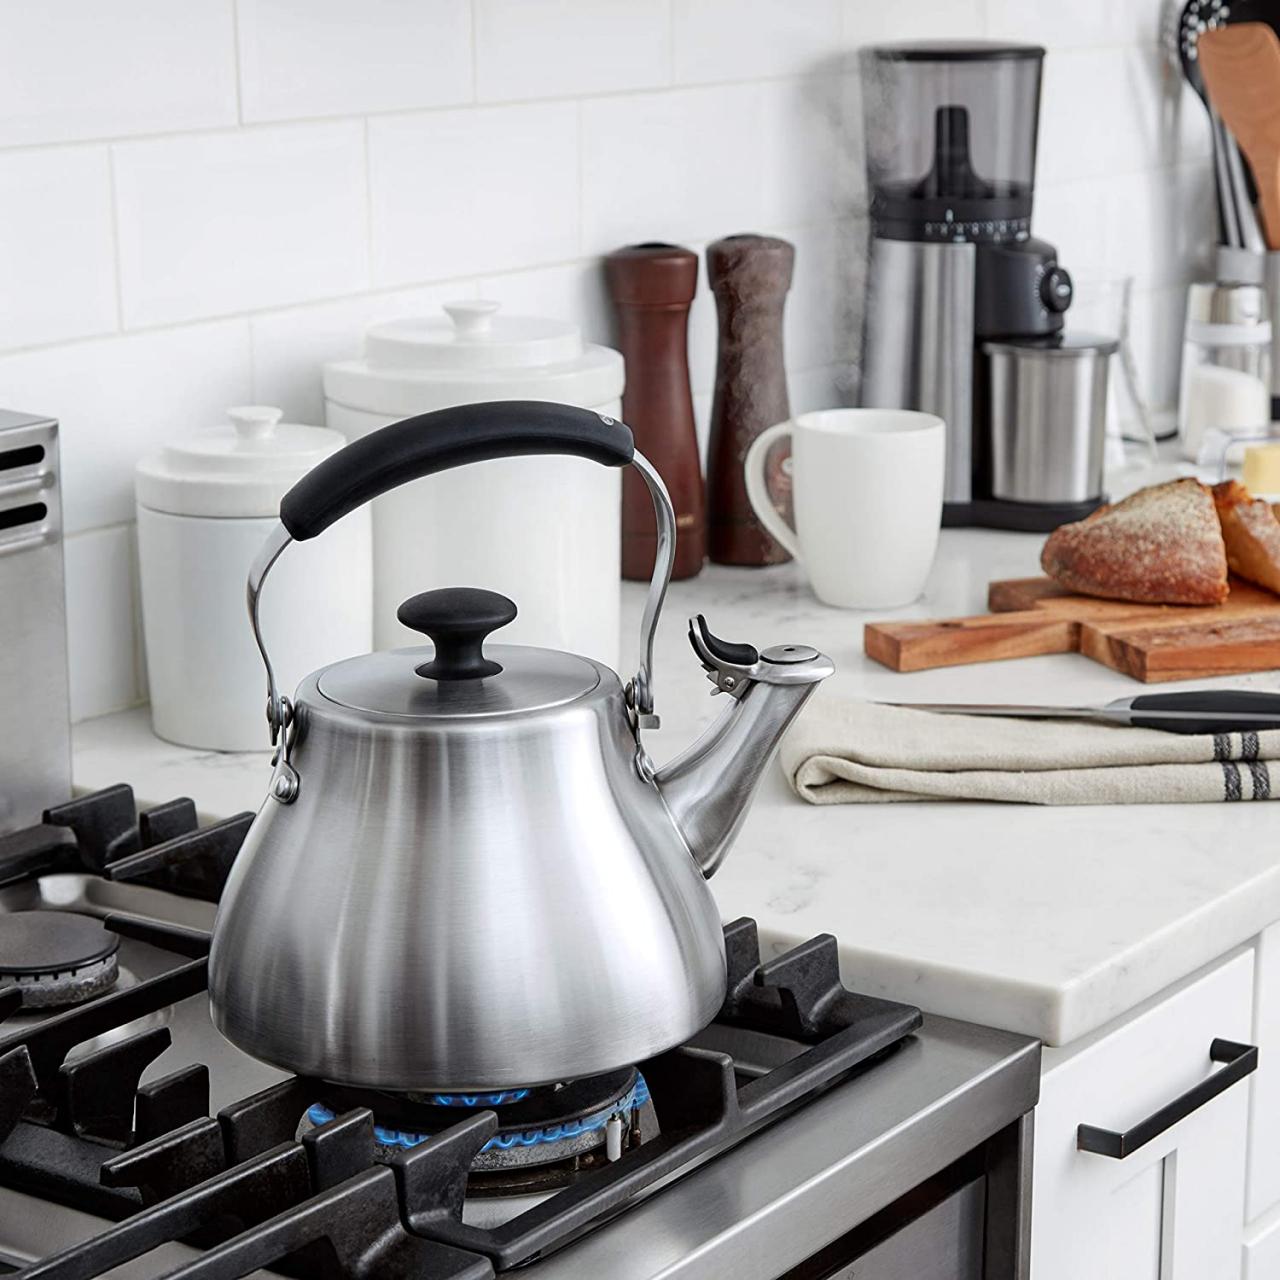 https://food.fnr.sndimg.com/content/dam/images/food/products/2022/1/21/rx_oxo-brew-classic-tea-kettle.jpeg.rend.hgtvcom.1280.1280.suffix/1642794251429.jpeg